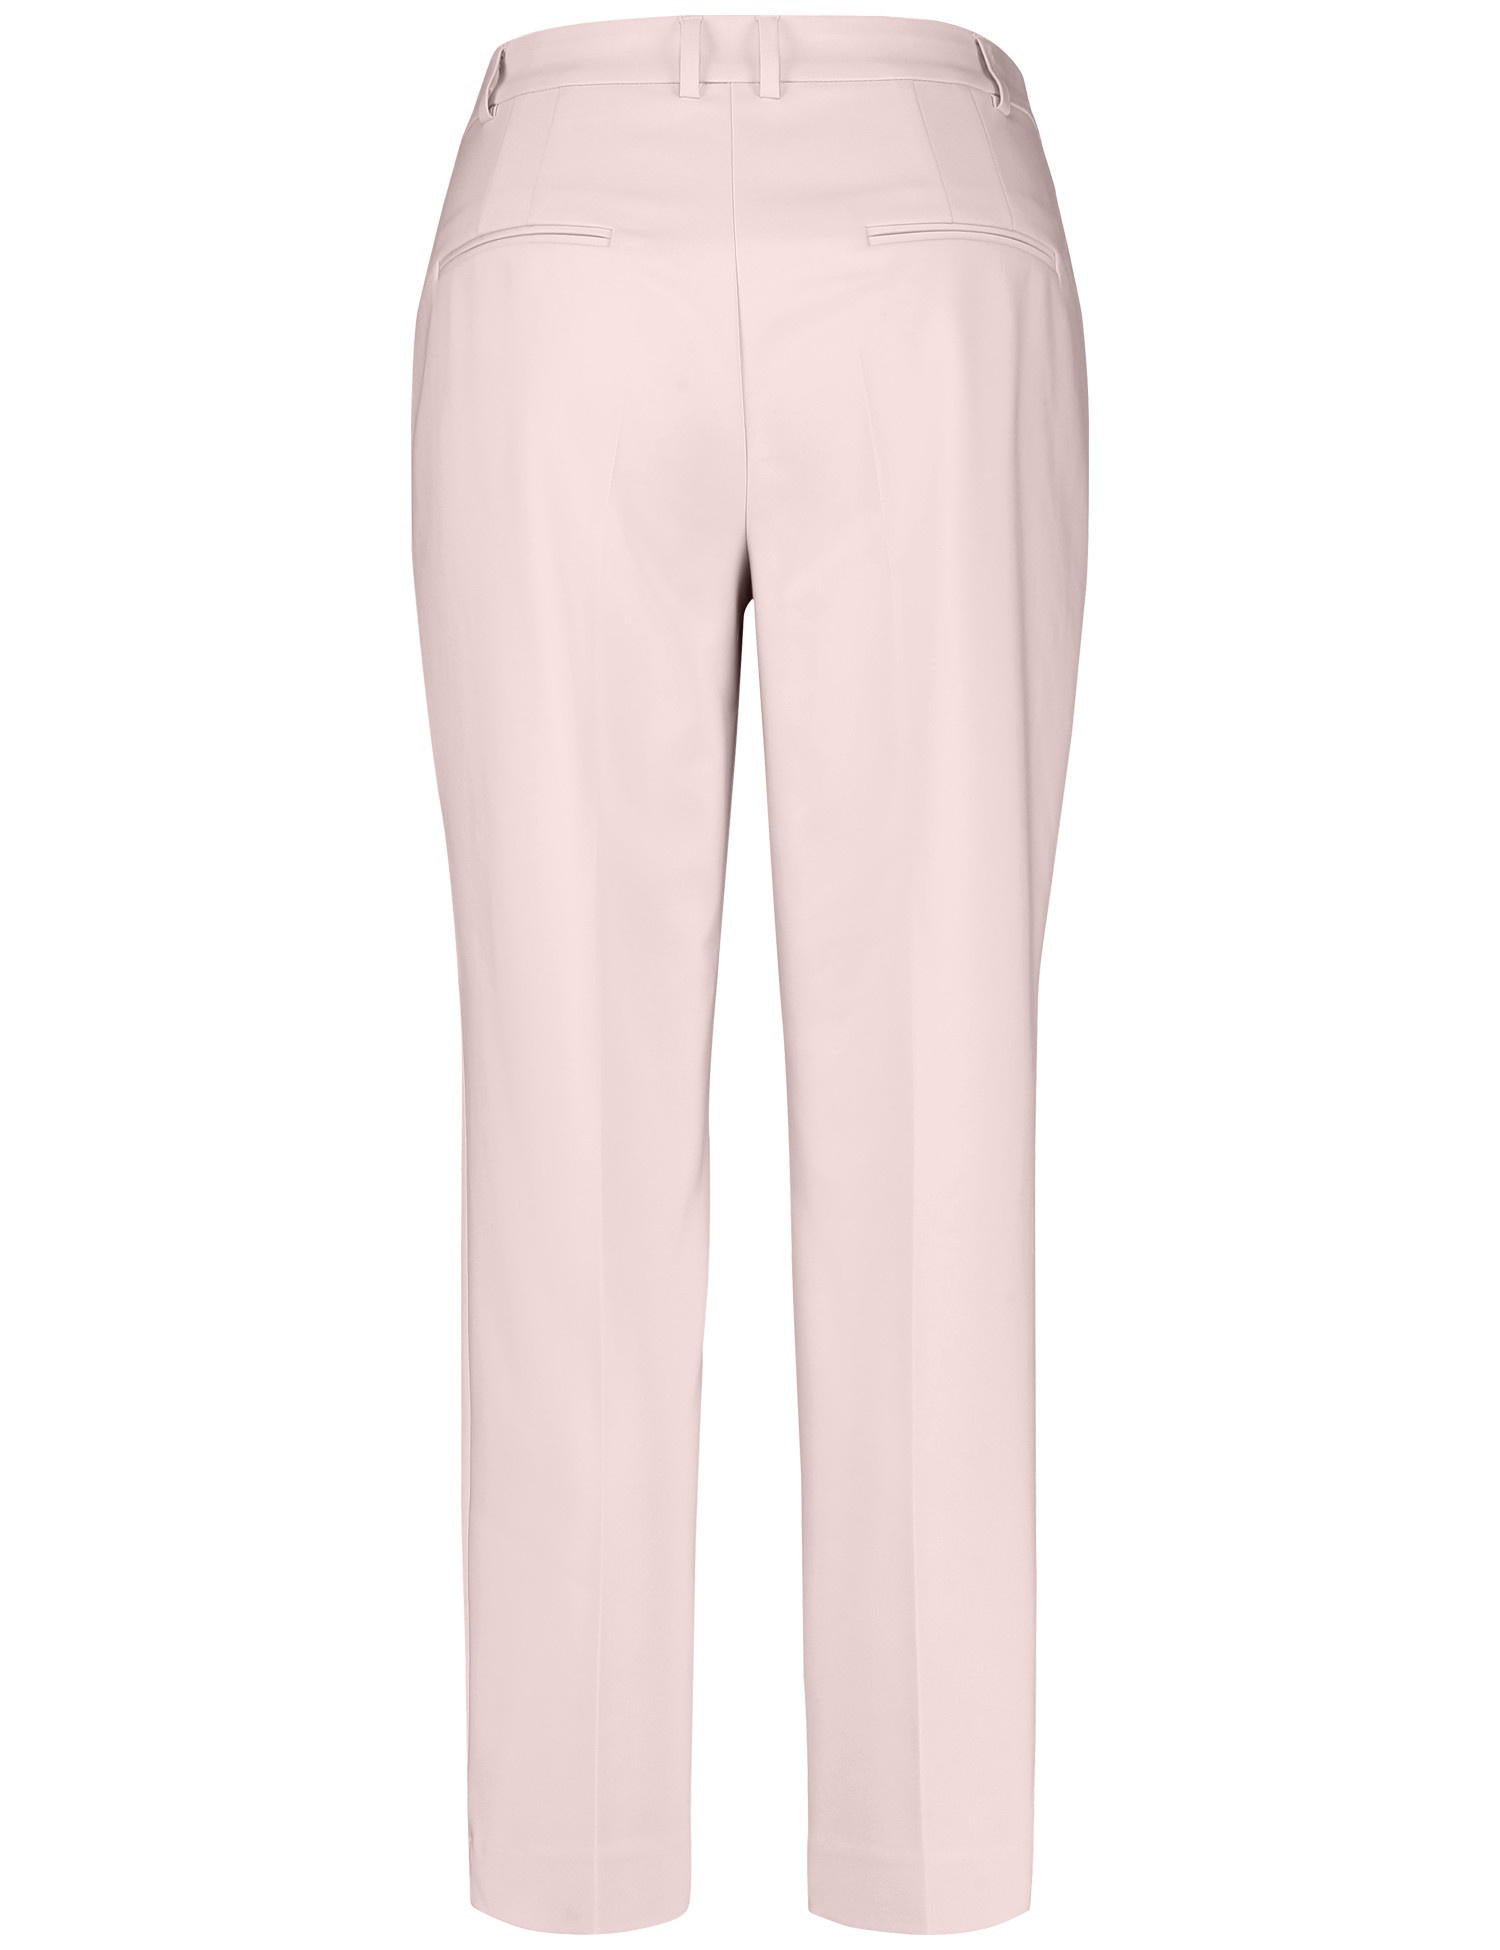 Elegant Trousers With Pressed Pleats_320006-31335_30289_03